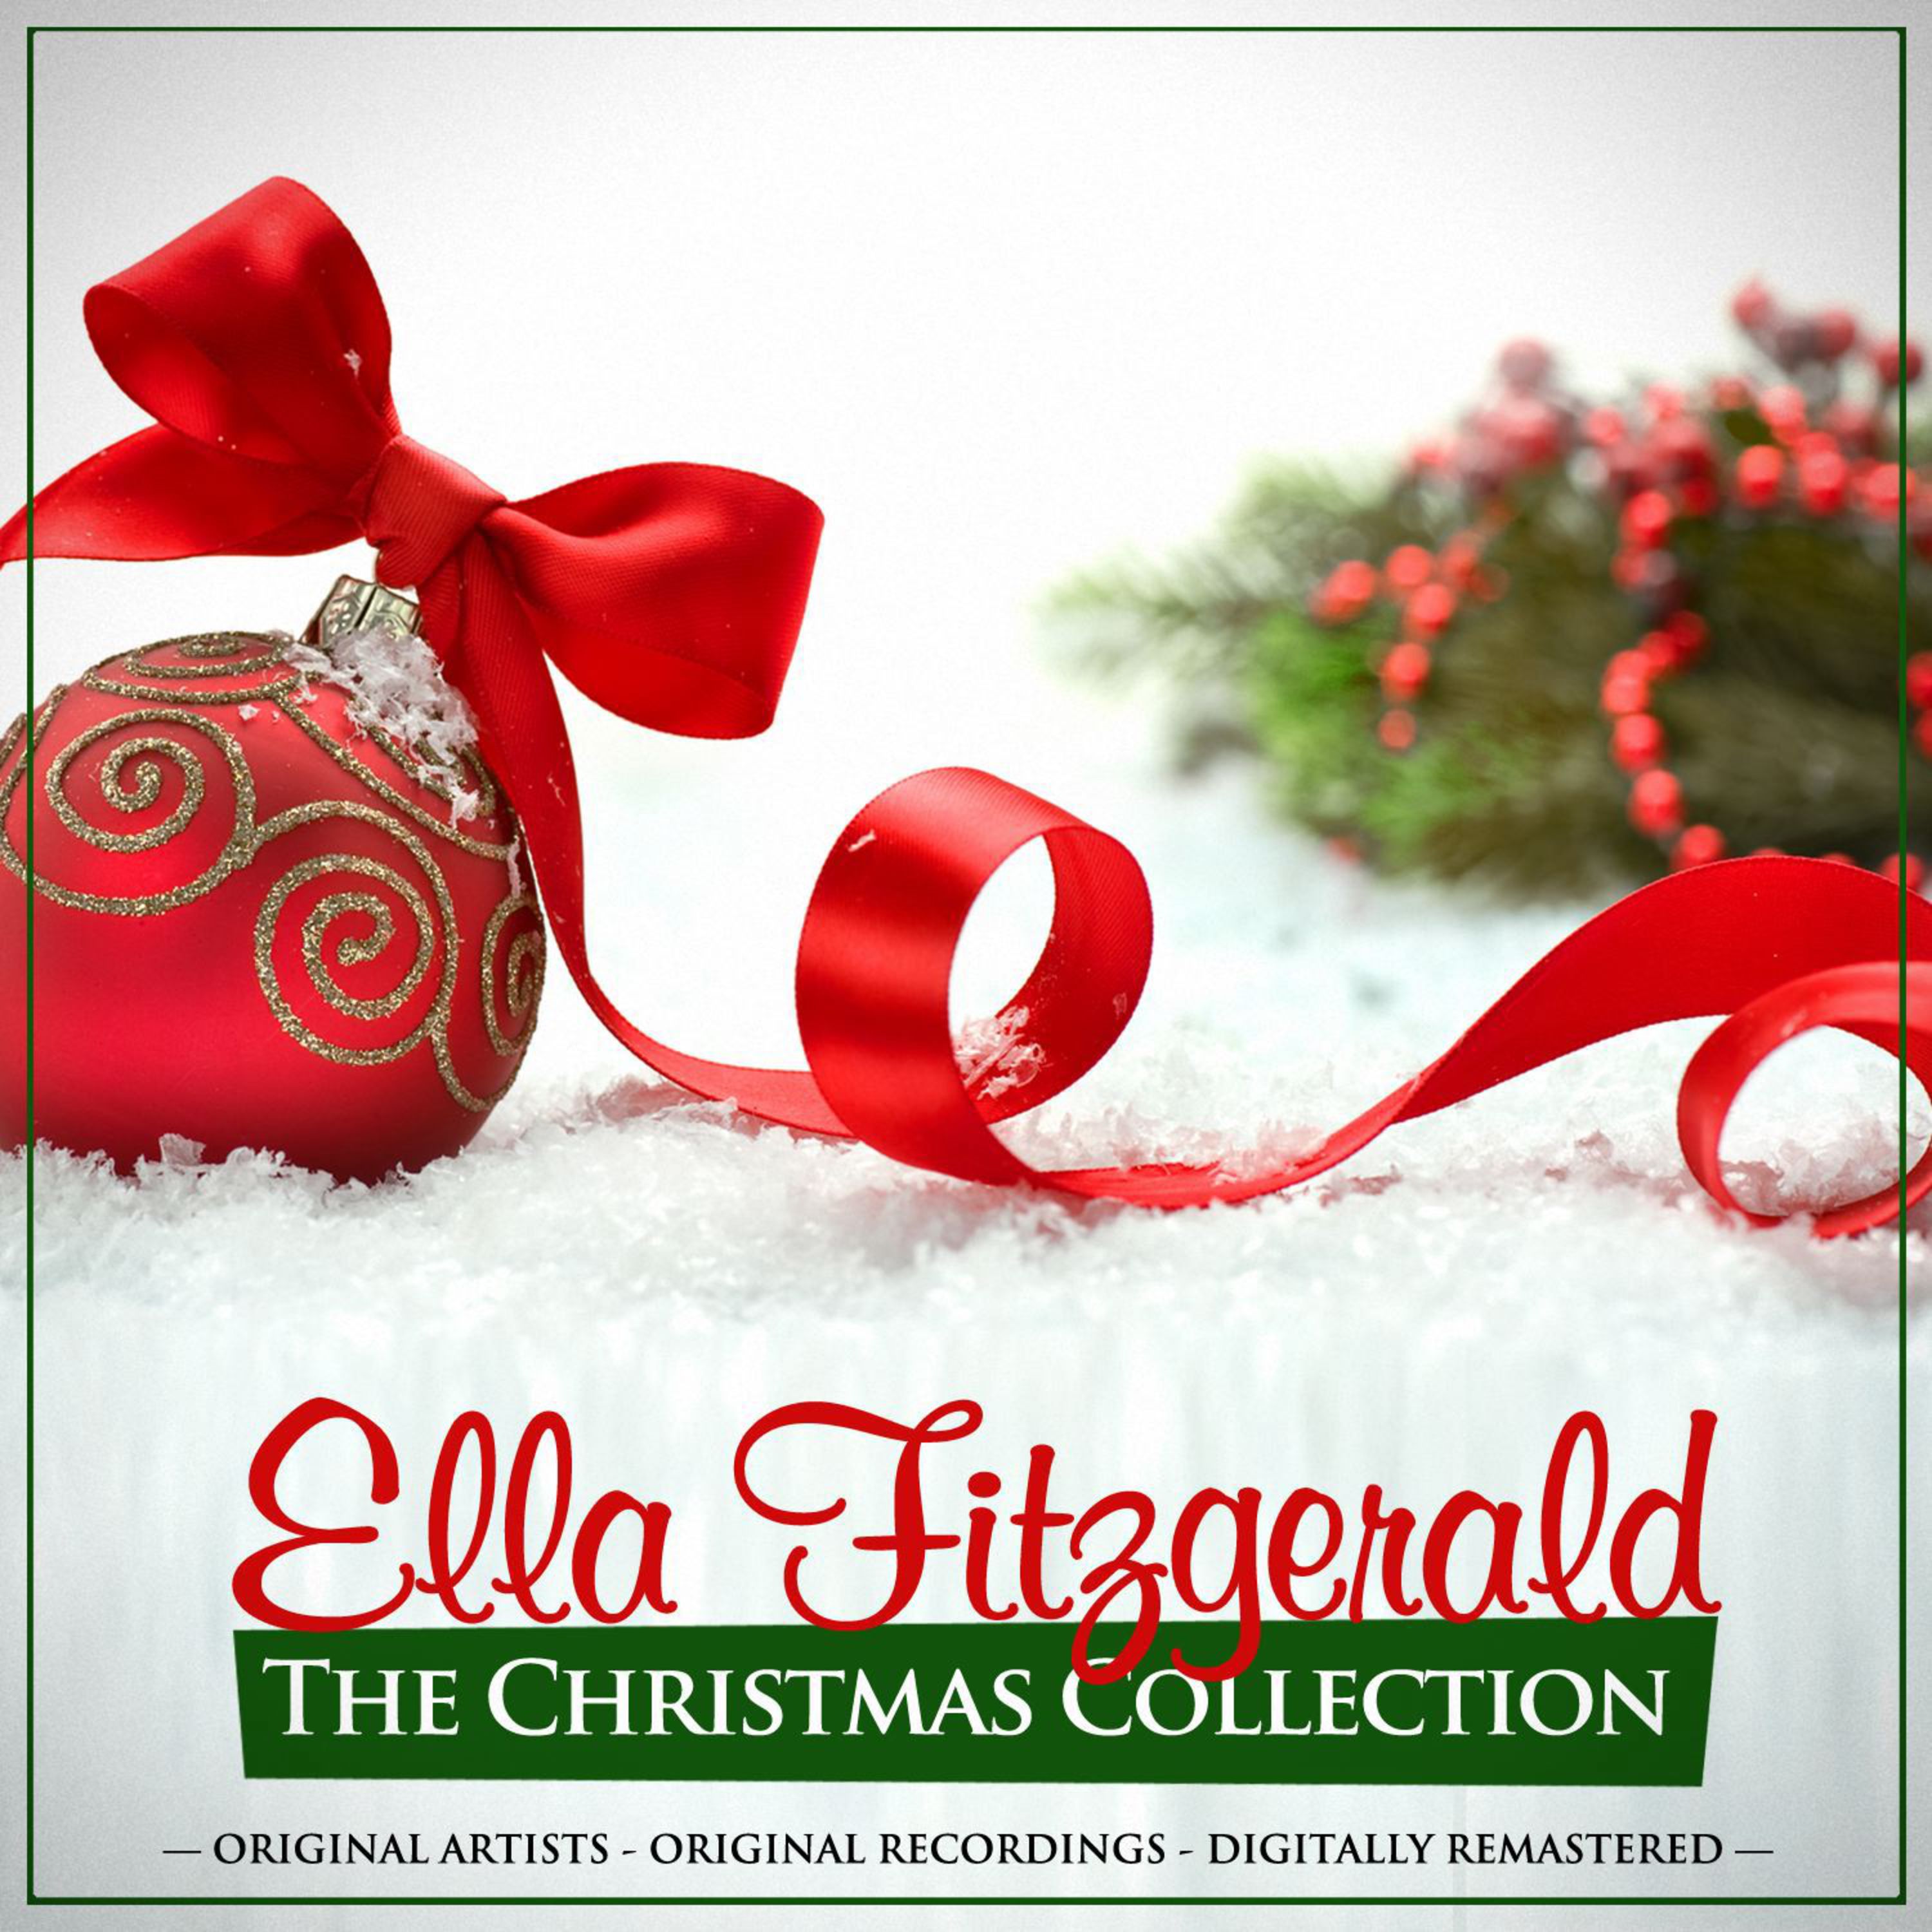 The Christmas Collection: Ella Fitzgerald (Remastered)